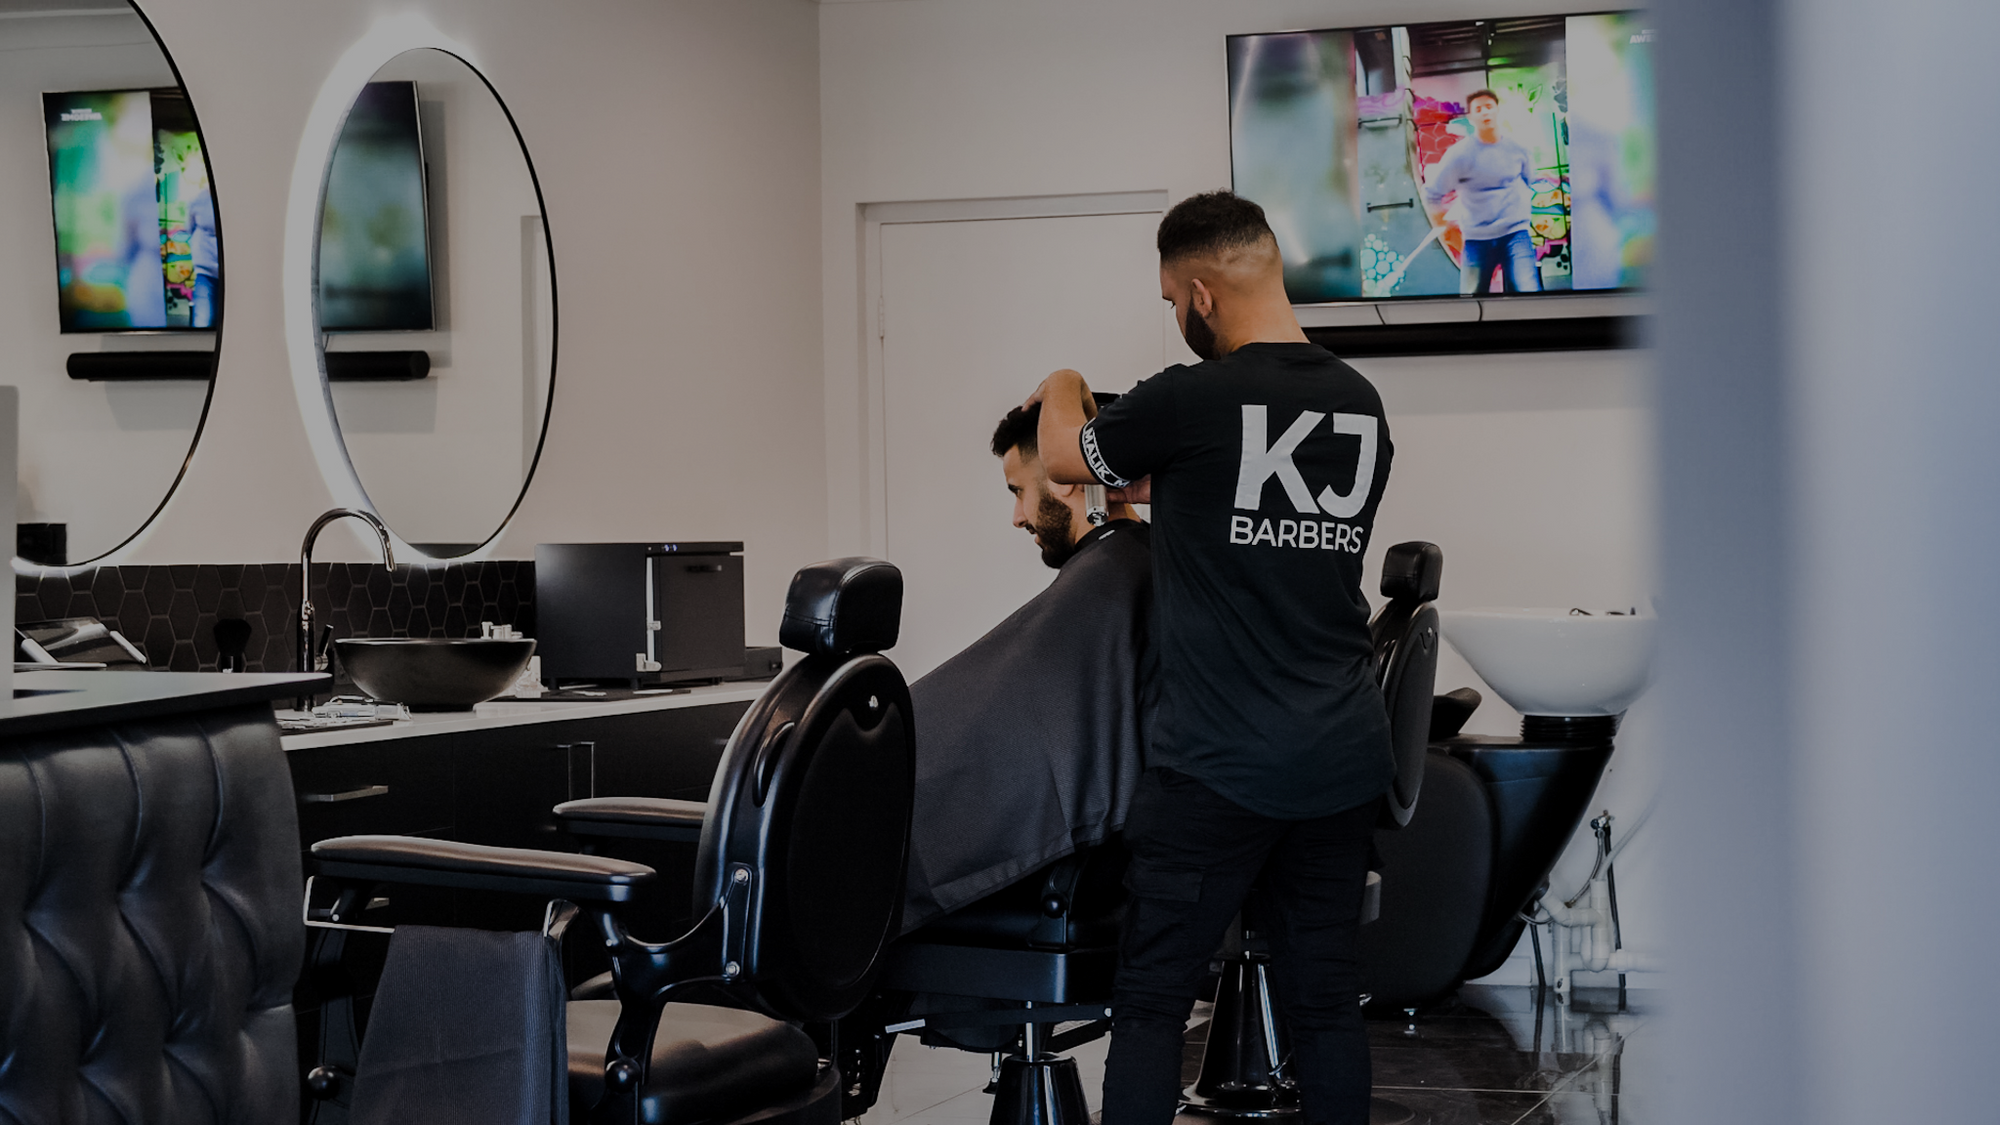 Adelaide's most talented and skilful barbershop